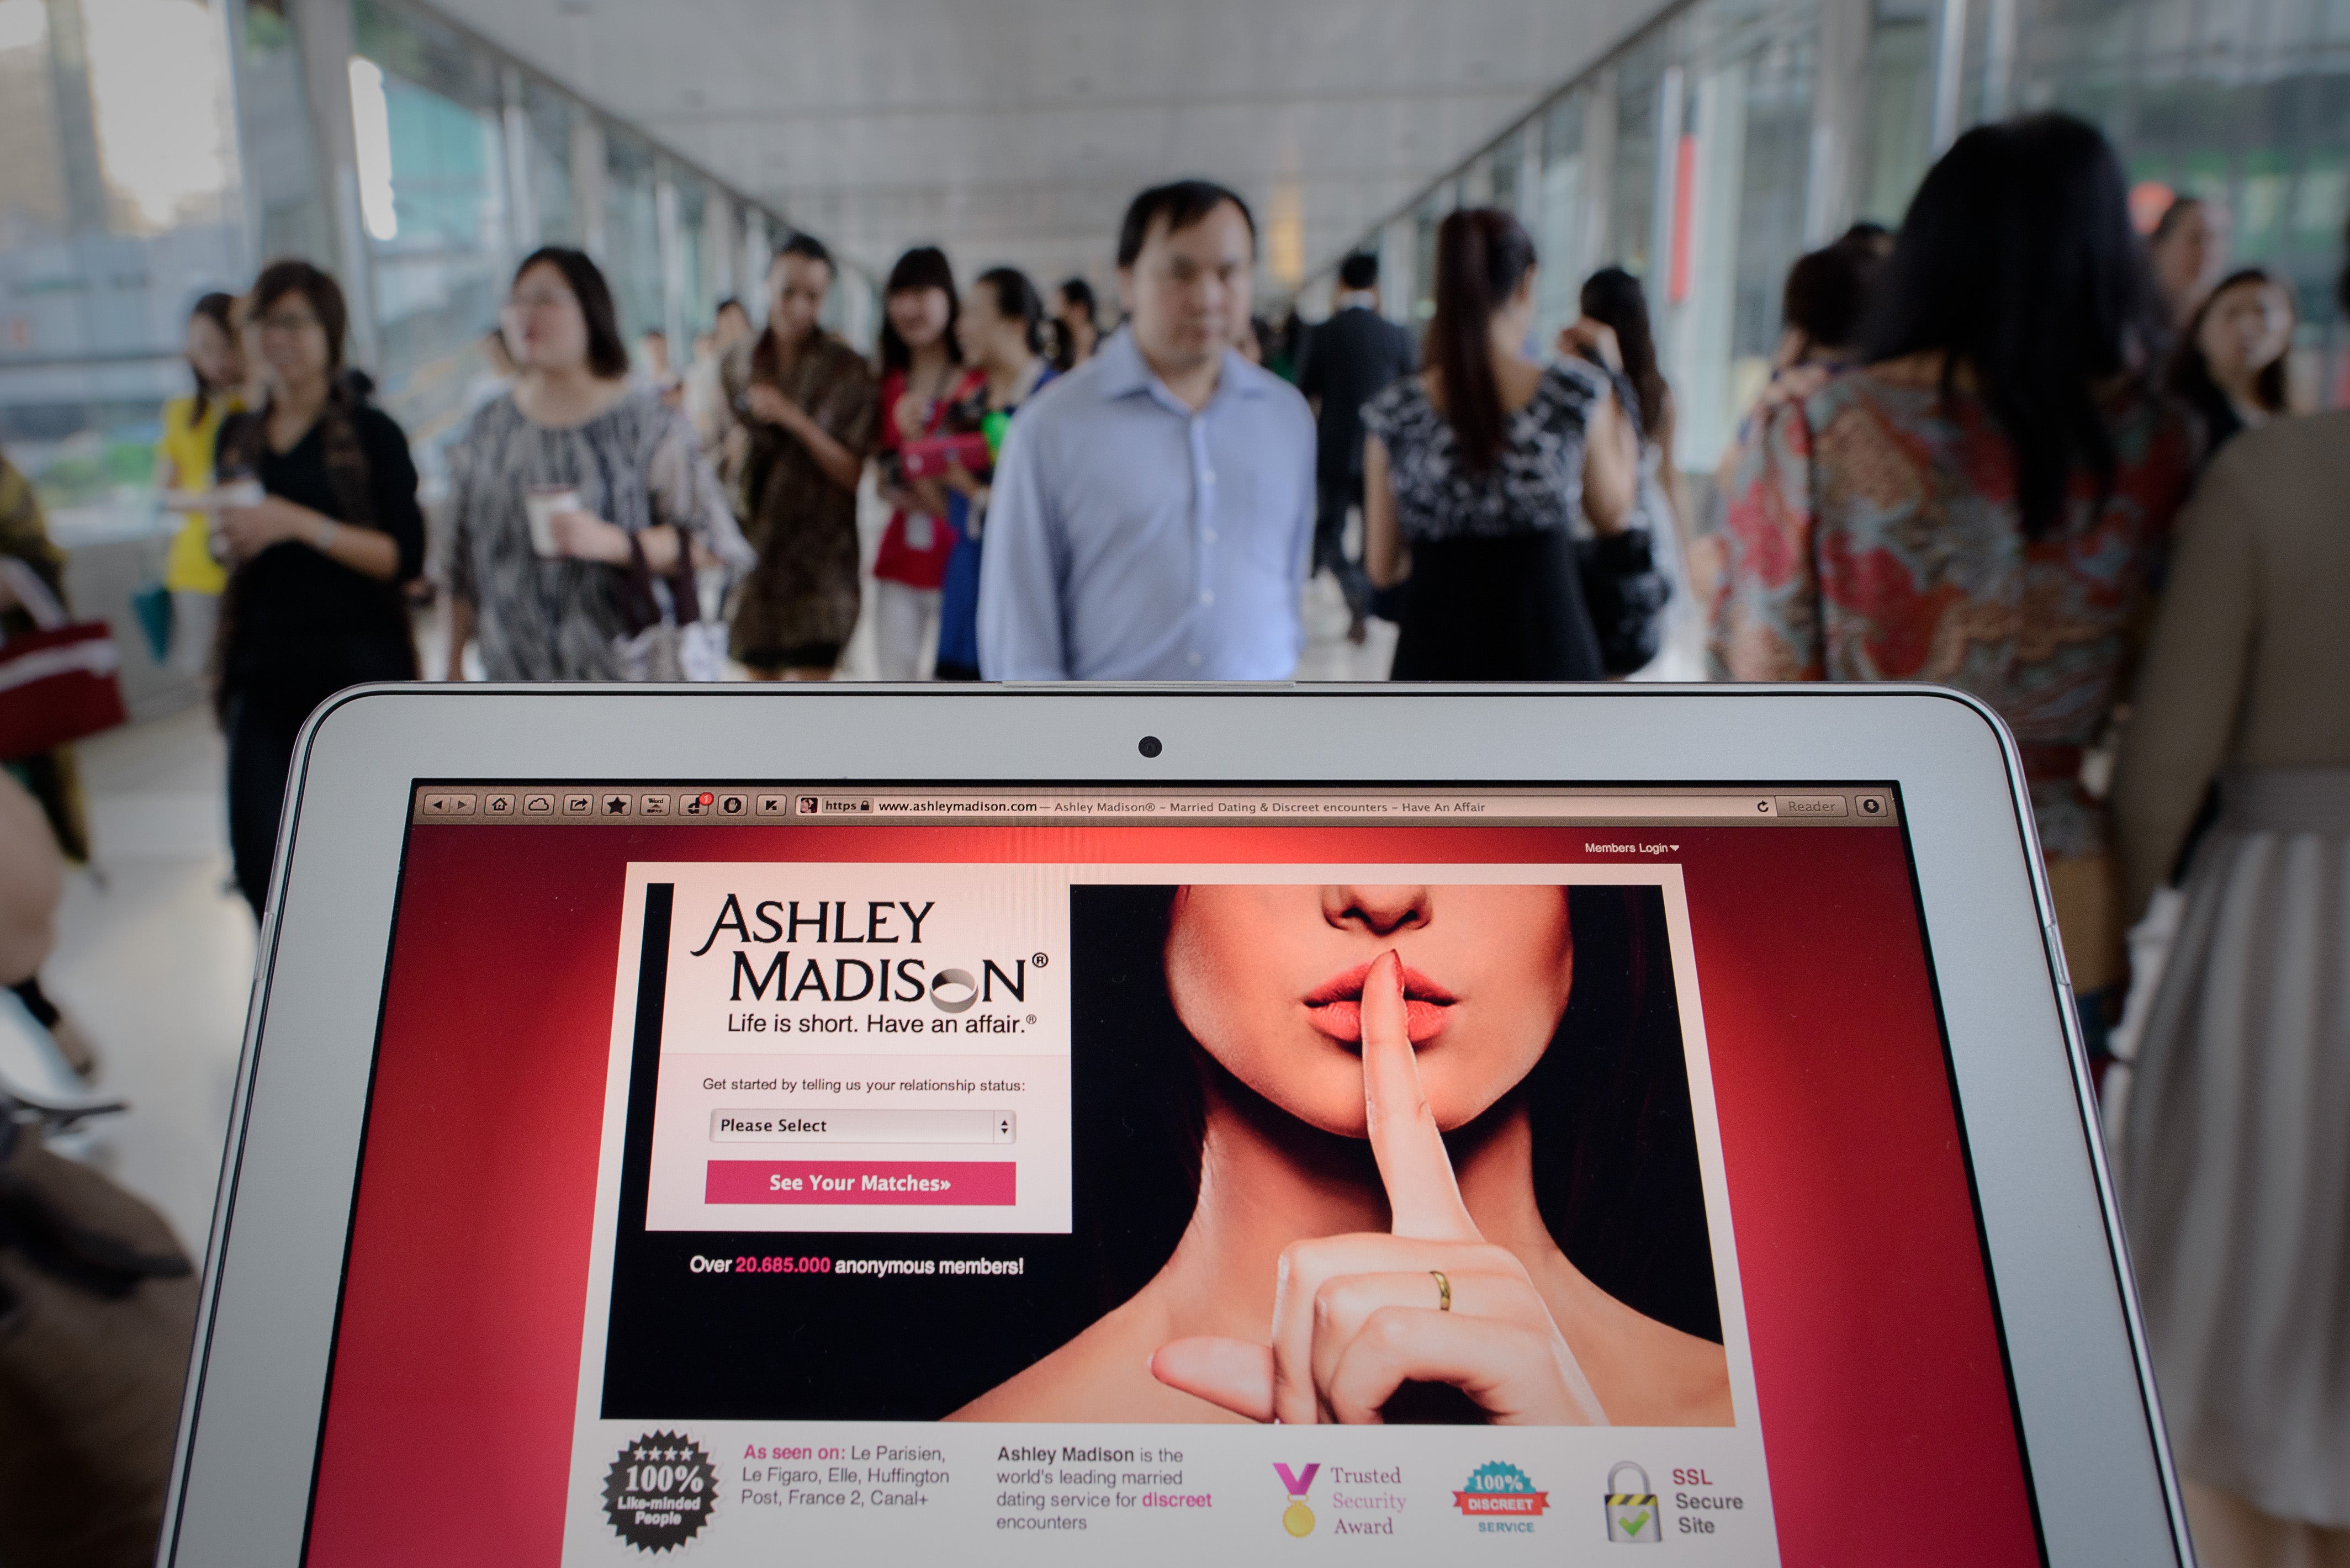 Ashley Madison’s homepage pictured in 2013. The website, aimed at people seeking affairs, experienced a massive data breach in 2015